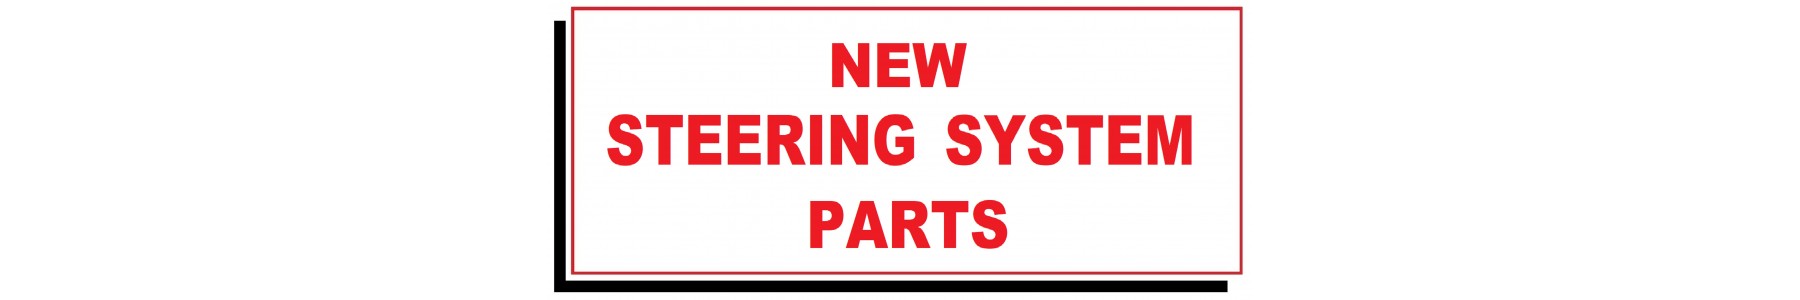 NEW STEERING SYSTEM PARTS